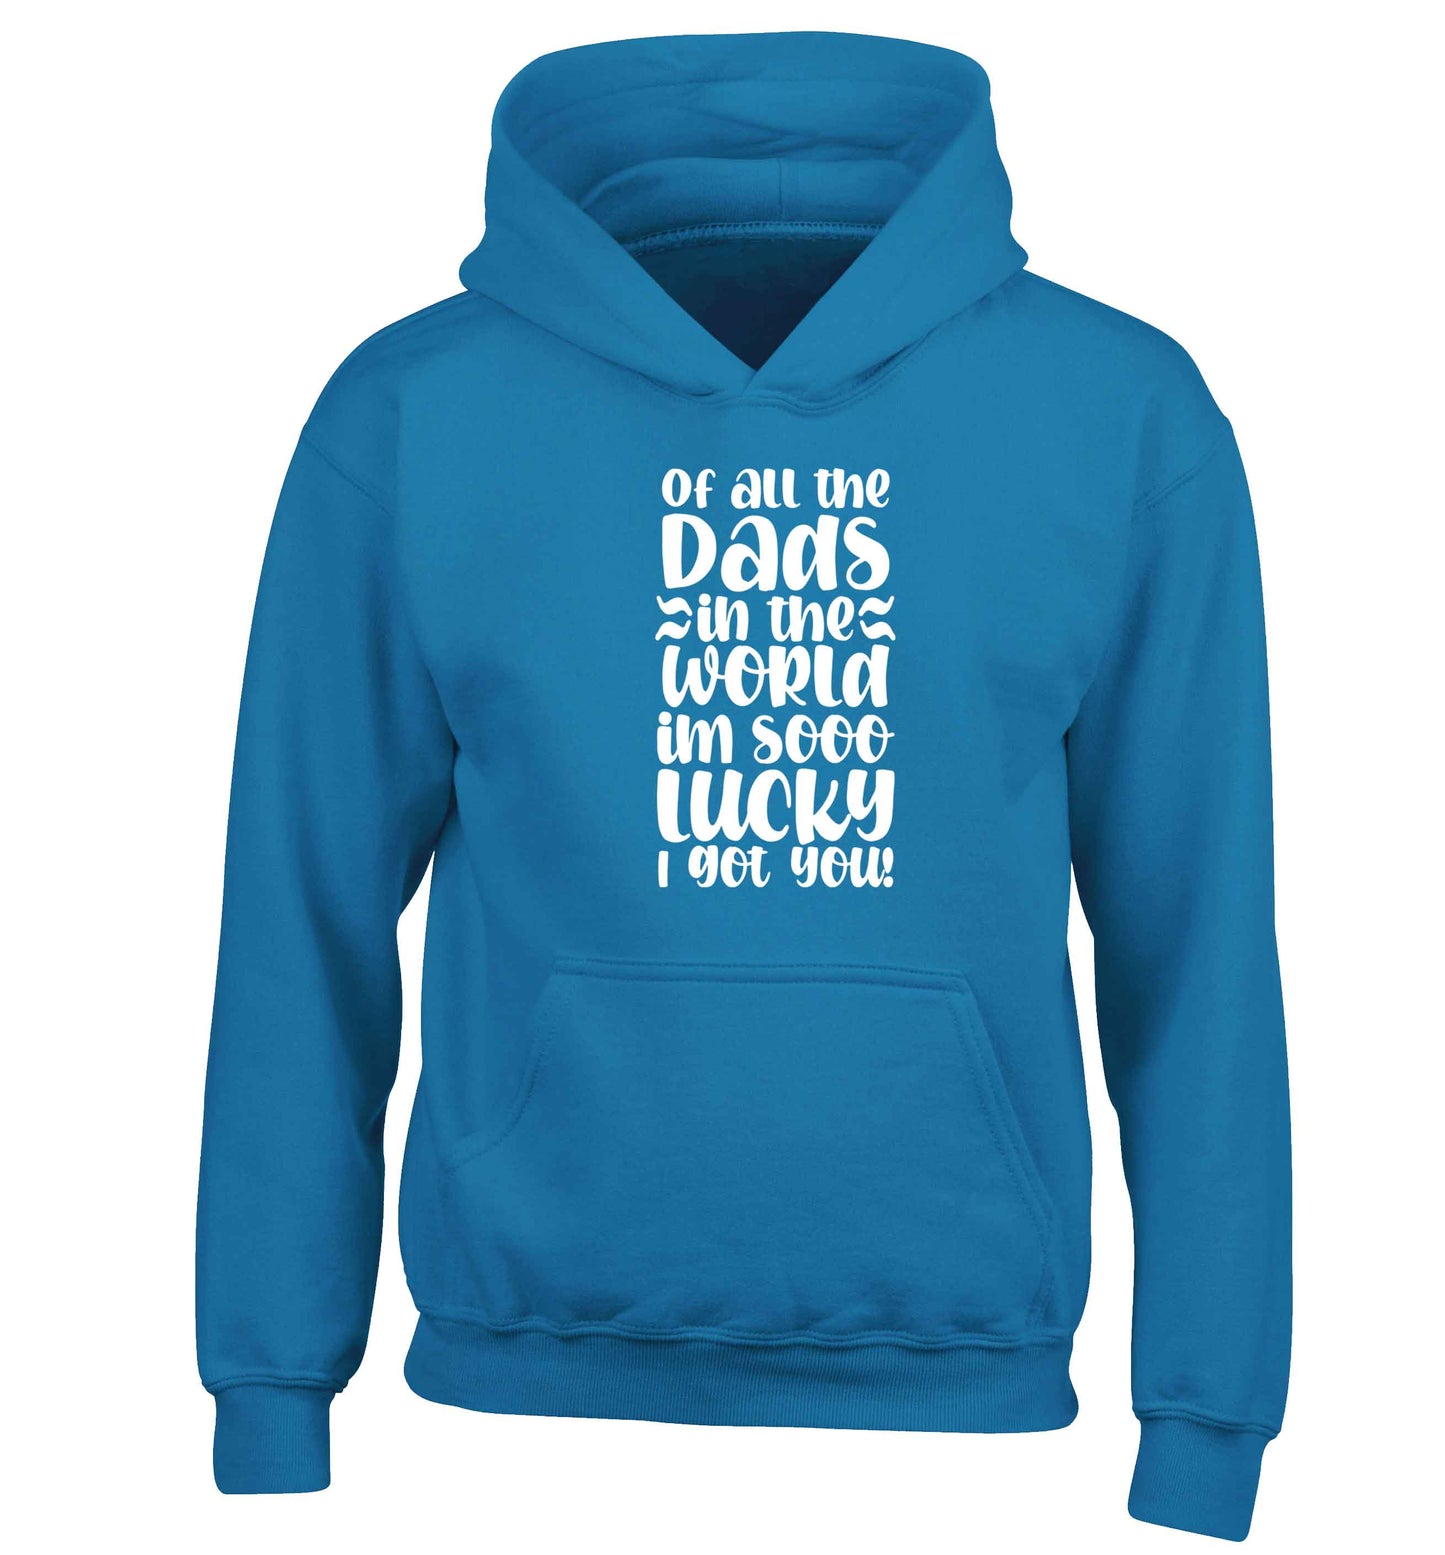 I'm as lucky as can be the worlds greatest dad belongs to me! children's blue hoodie 12-13 Years